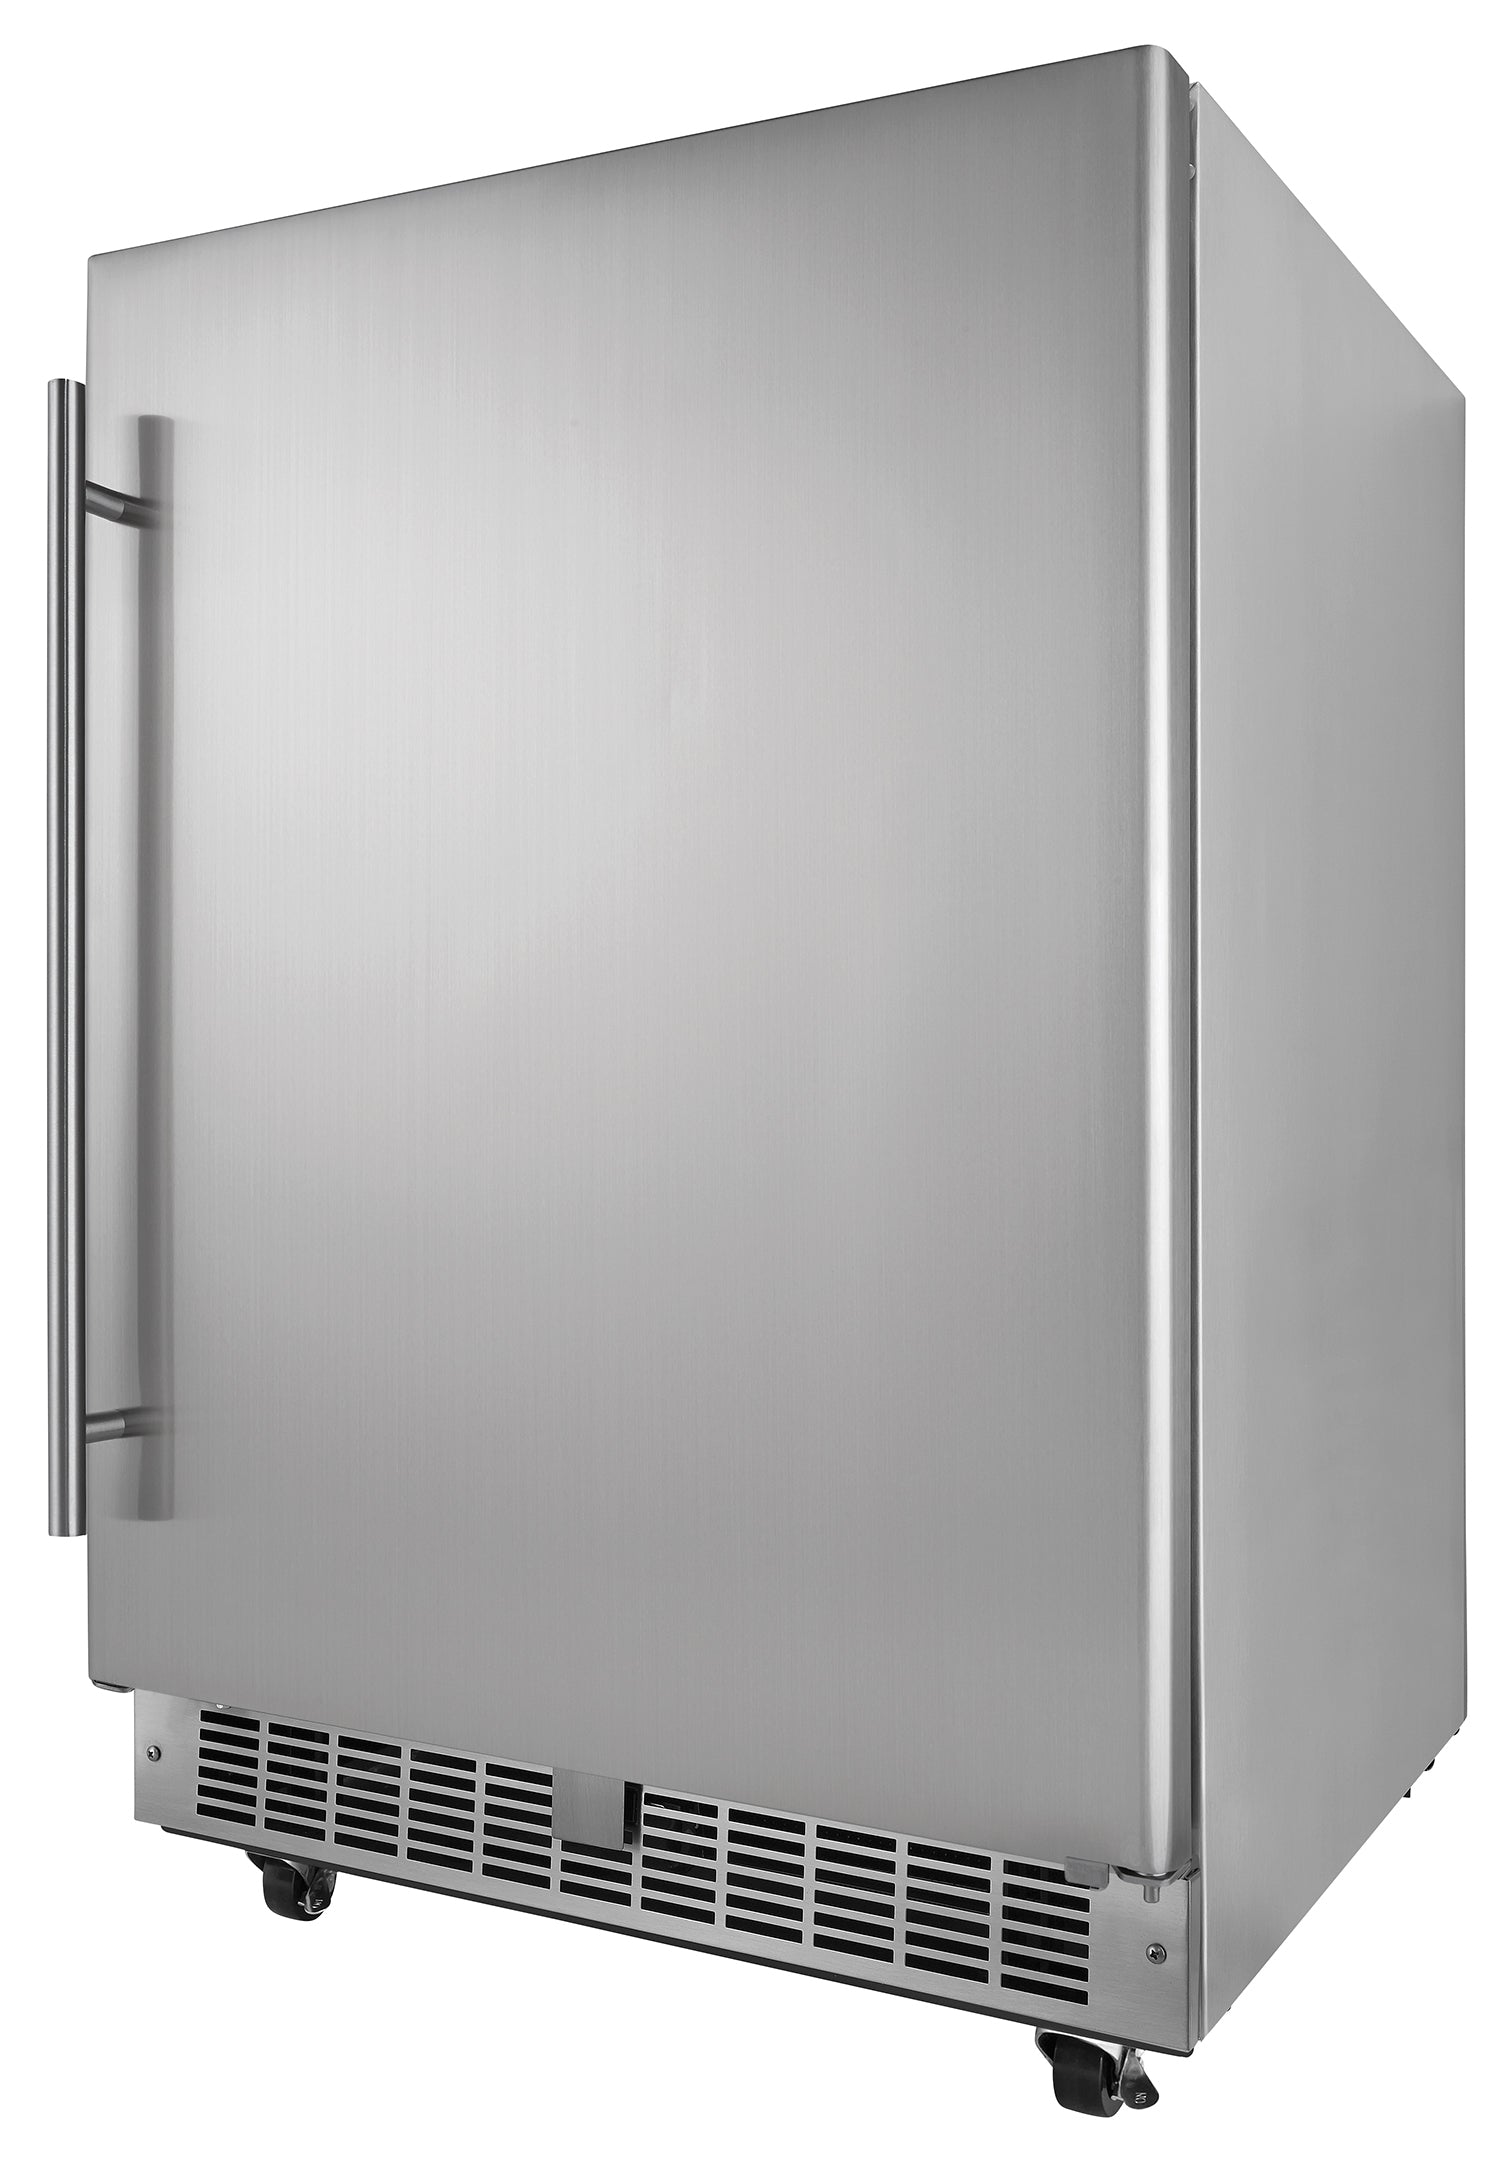 Silhouette - 23.8 Inch 5.5 cu. ft Built In / Integrated Refrigerator in Stainless - DAR055D1BSSPRO